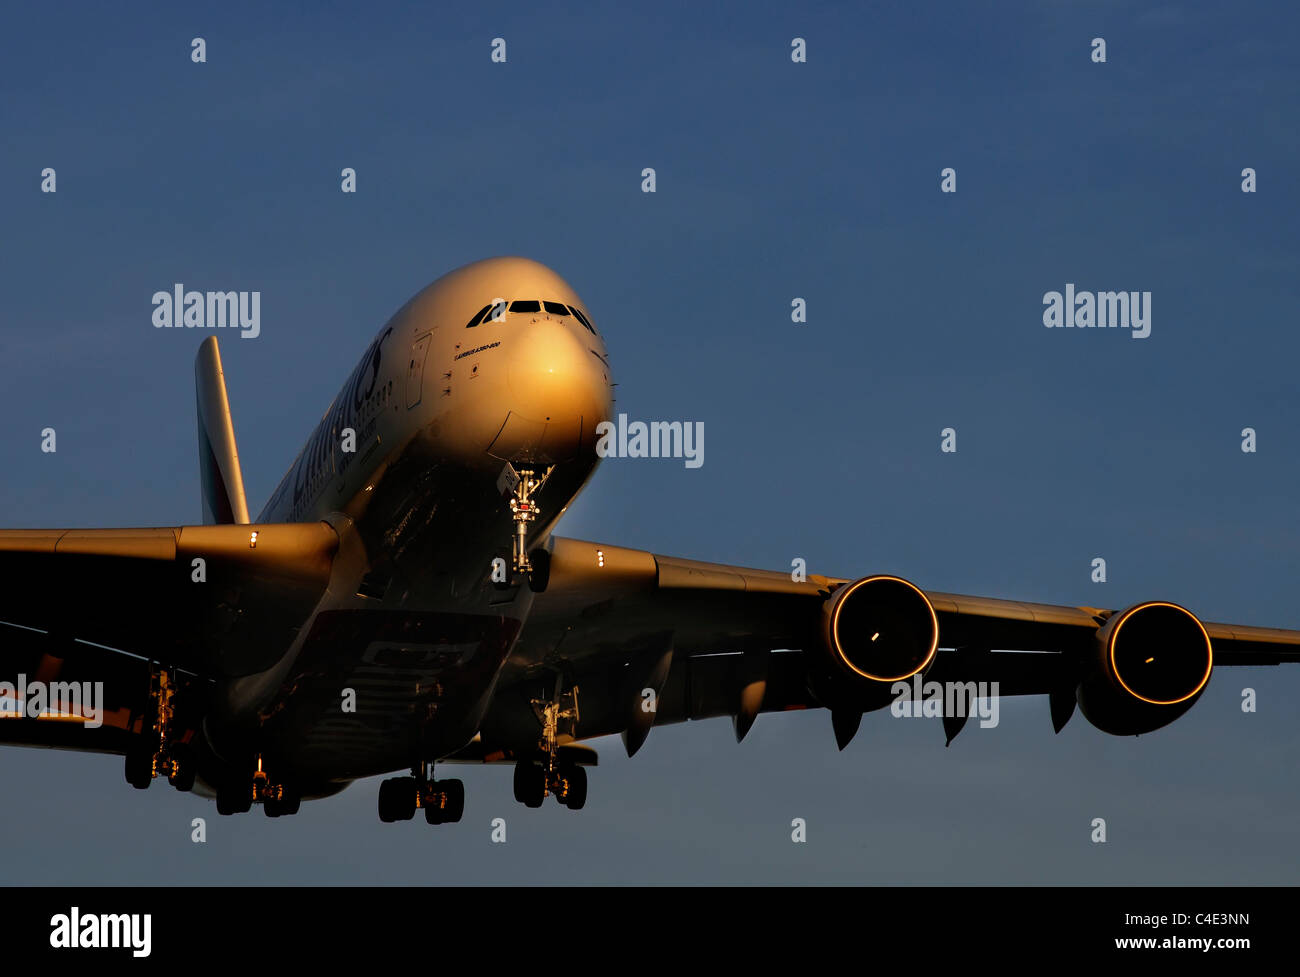 The Airbus A380 landing in the sunset Stock Photo